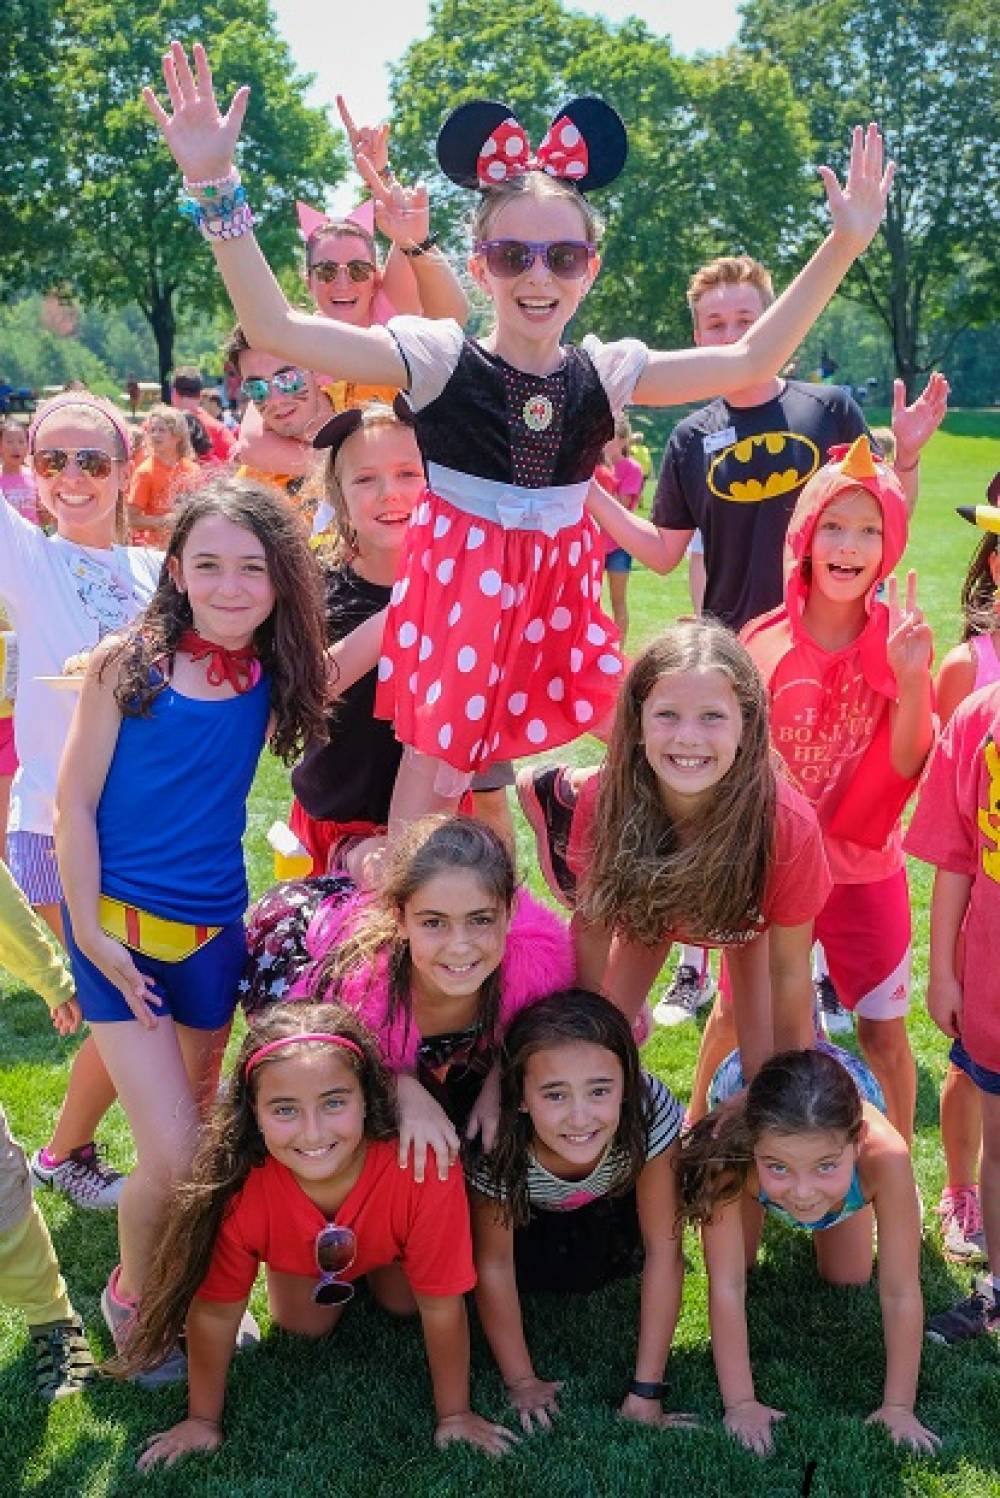 TOP MASSACHUSETTS SPORTS CAMP: Nobles Day Camp is a Top Sports Summer Camp located in Dedham Massachusetts offering many fun and enriching Sports and other camp programs. 